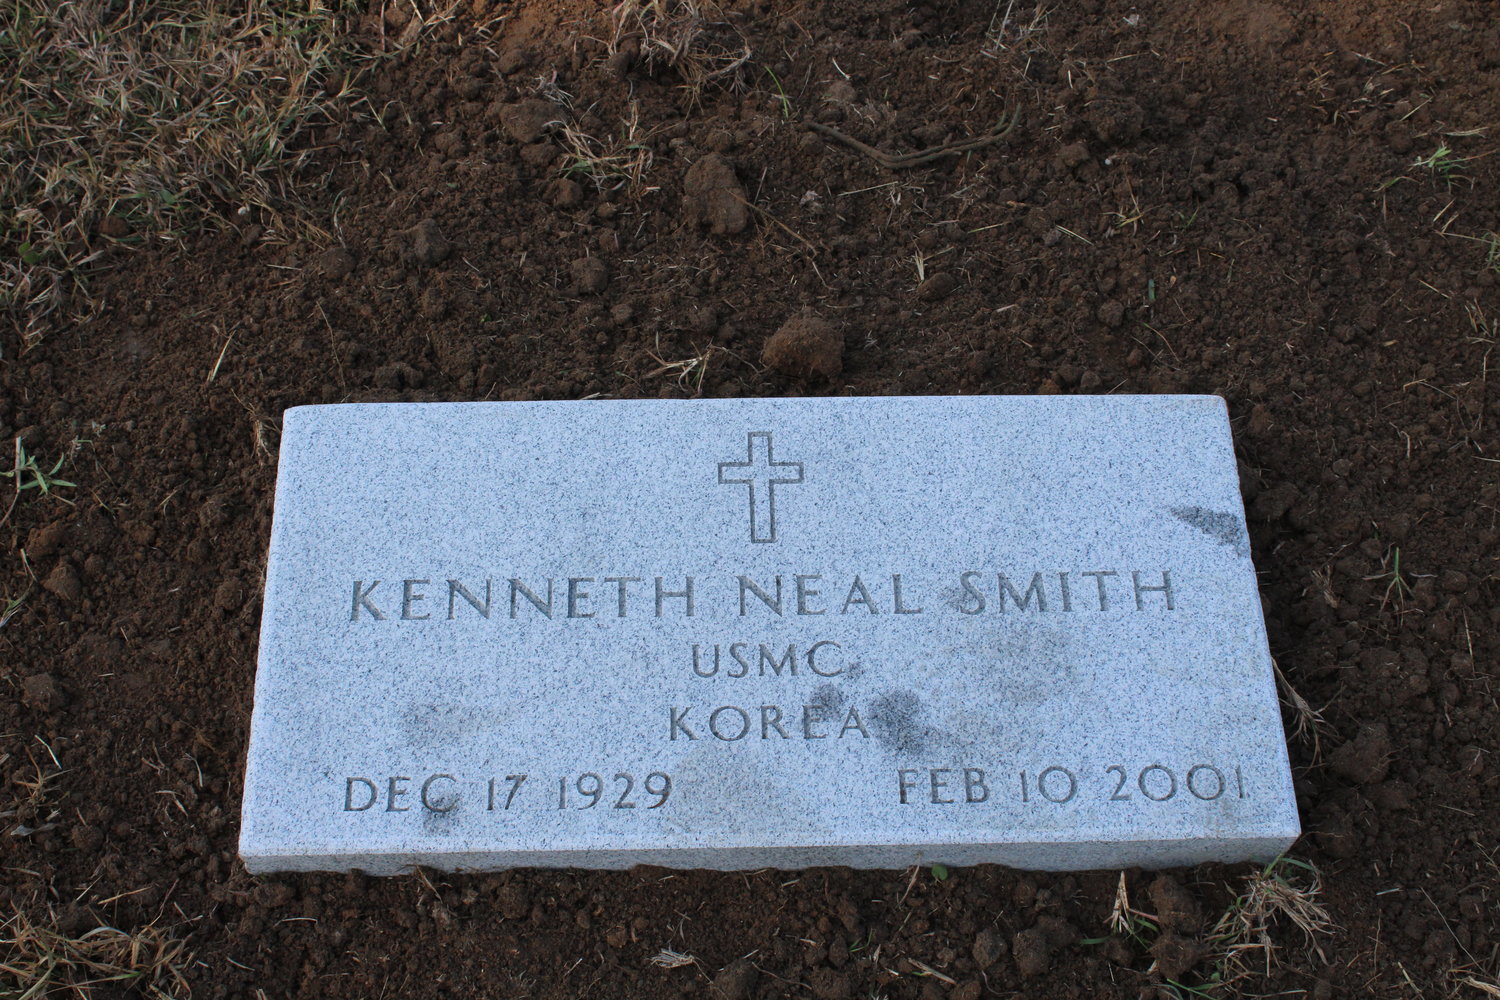 This marine’s grave was unmarked until Capitol National Monument rescued an old tomb stone and marked Kenneth Neal Smith’s final resting place. He served in Korea.